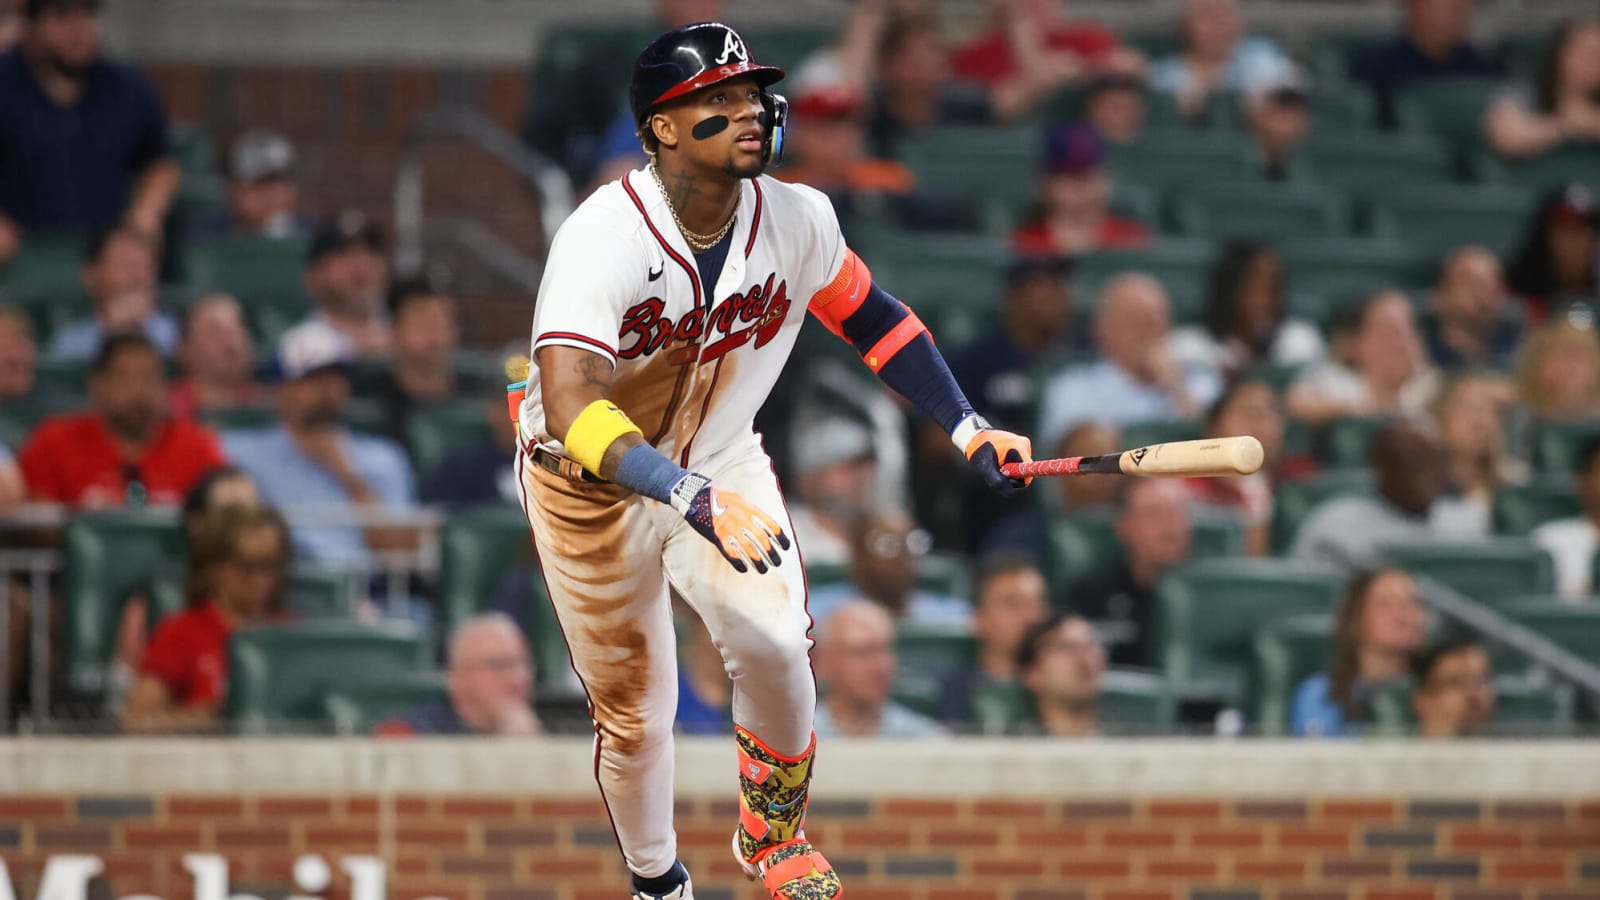 Chipper Jones gives Ronald Acuña Jr. about the highest compliment possible